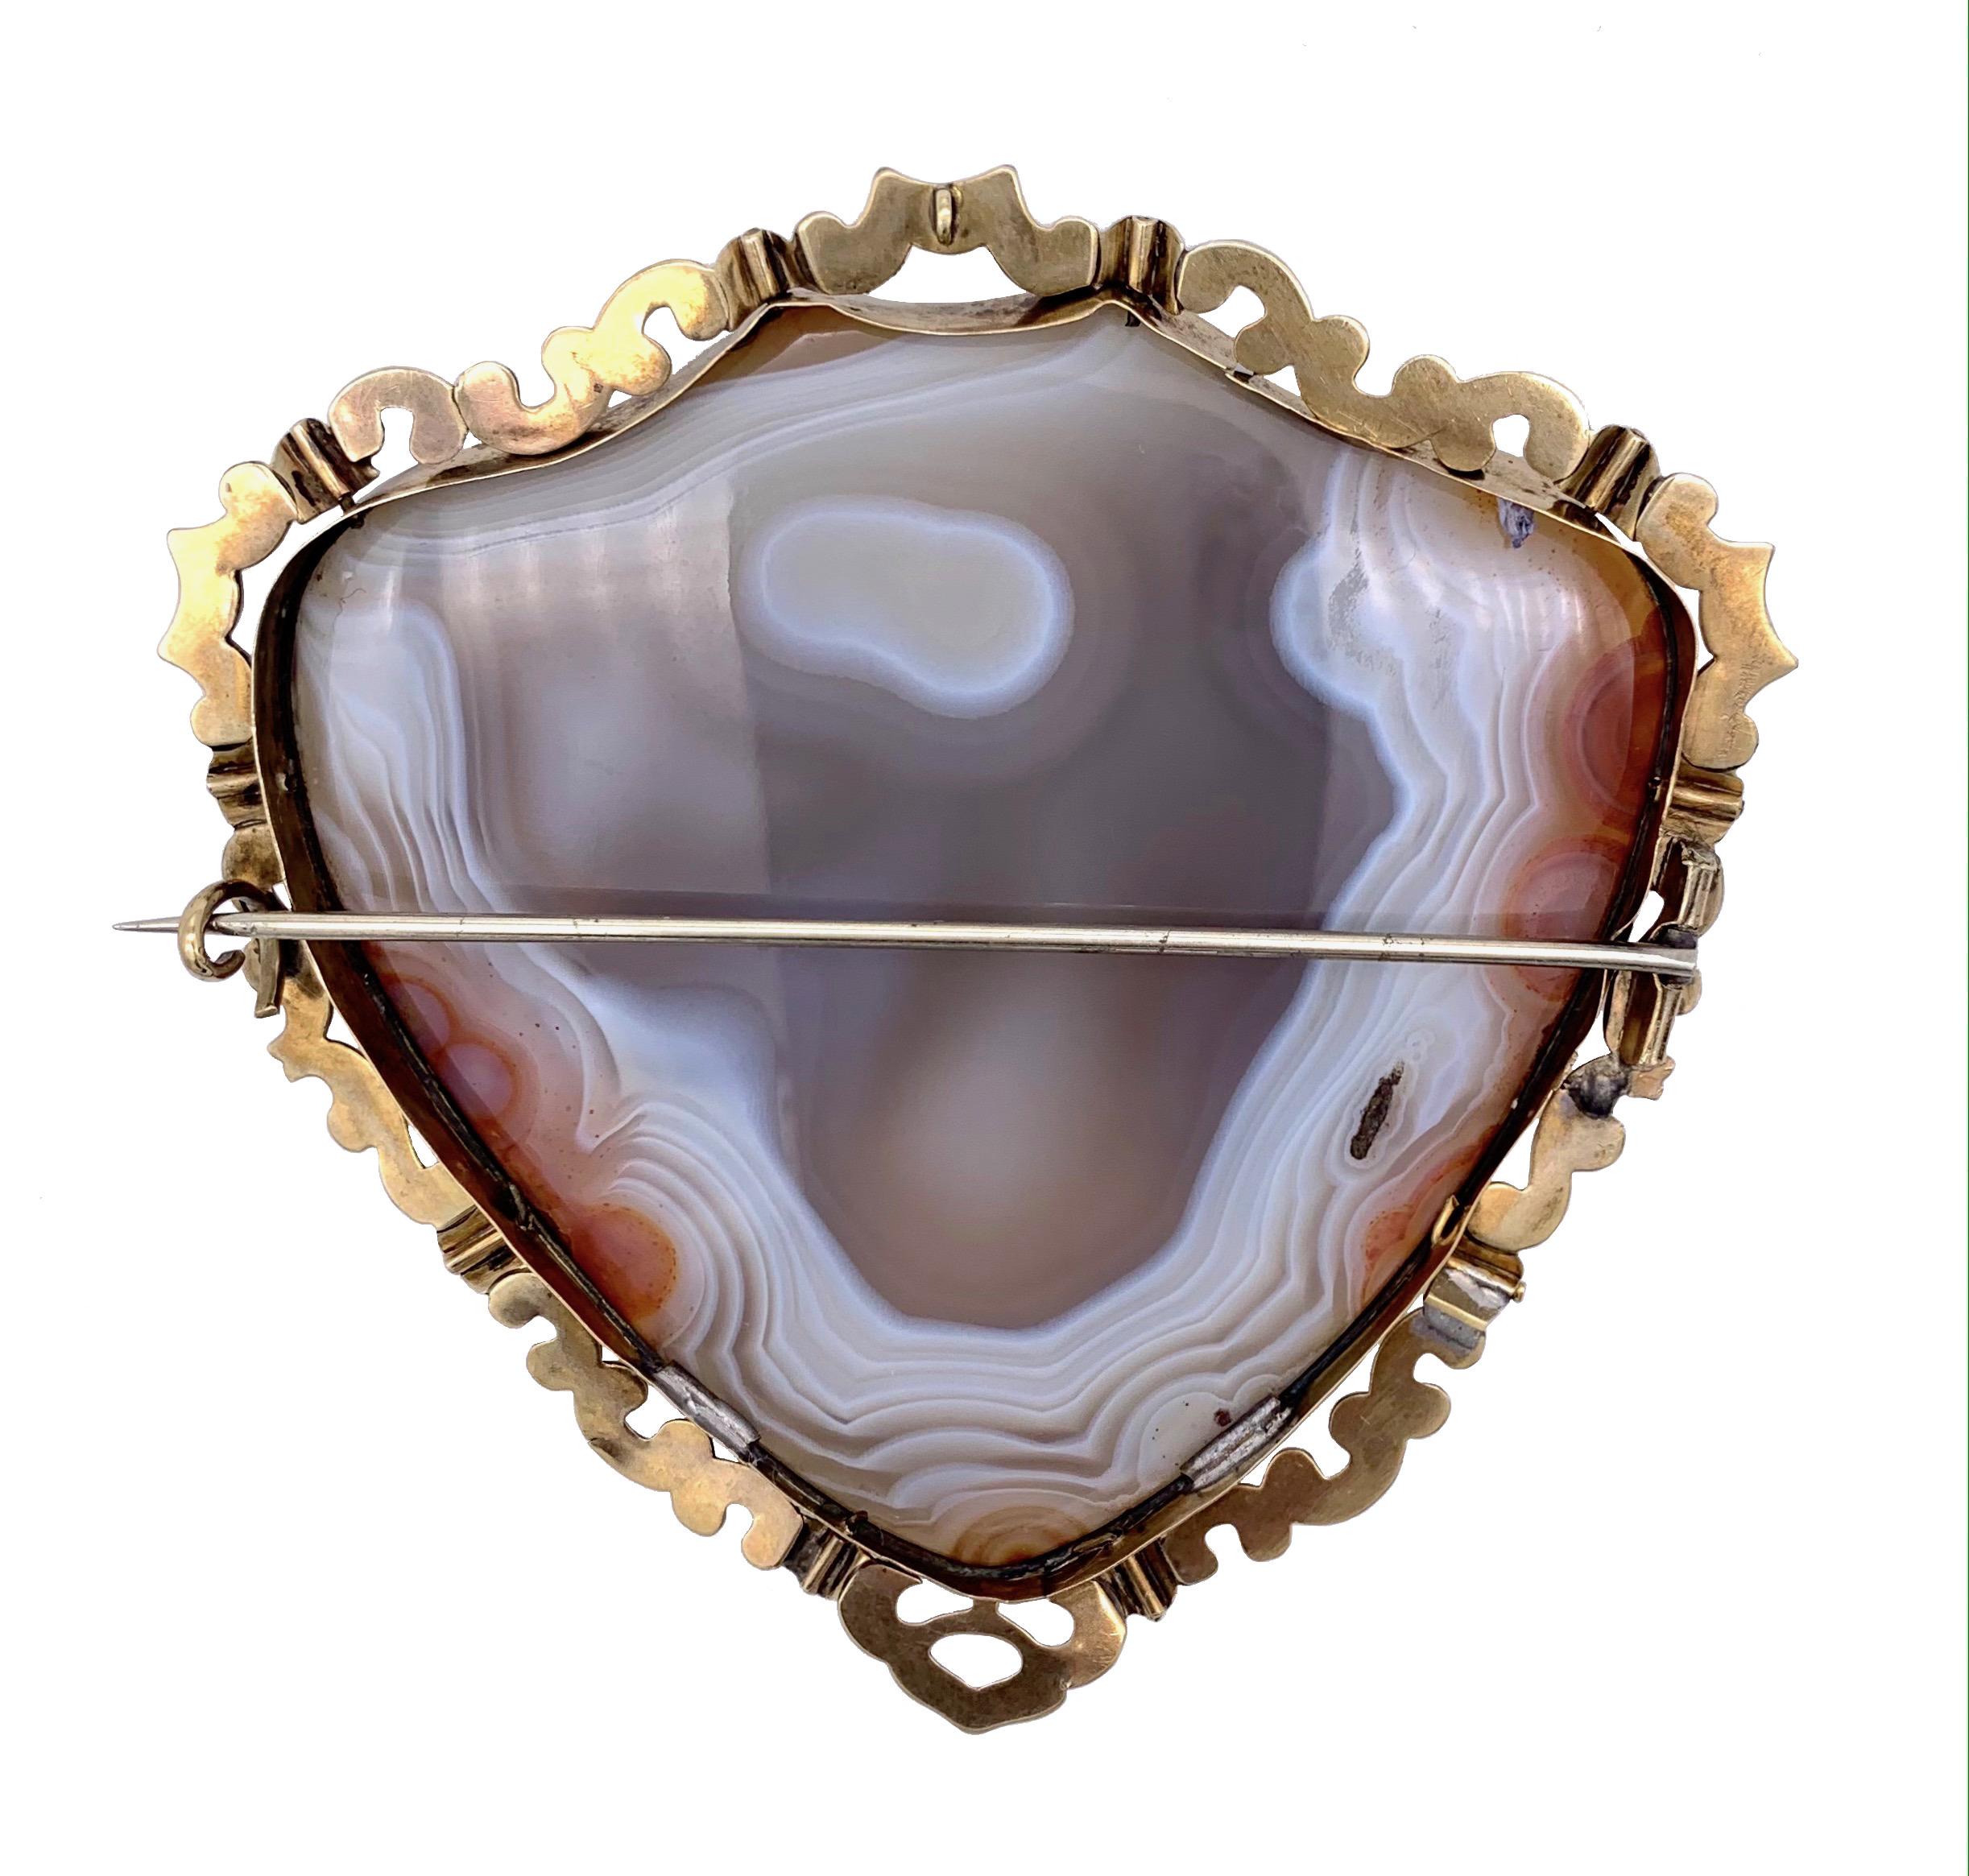 This beautiful Victorian brooch has an amazing size.
The agate is bevelled and carved in the shape of a shield. The beautiful stone is mounted in a setting decorated with golden scrolls. The large pin is made out of metal for added strength.
